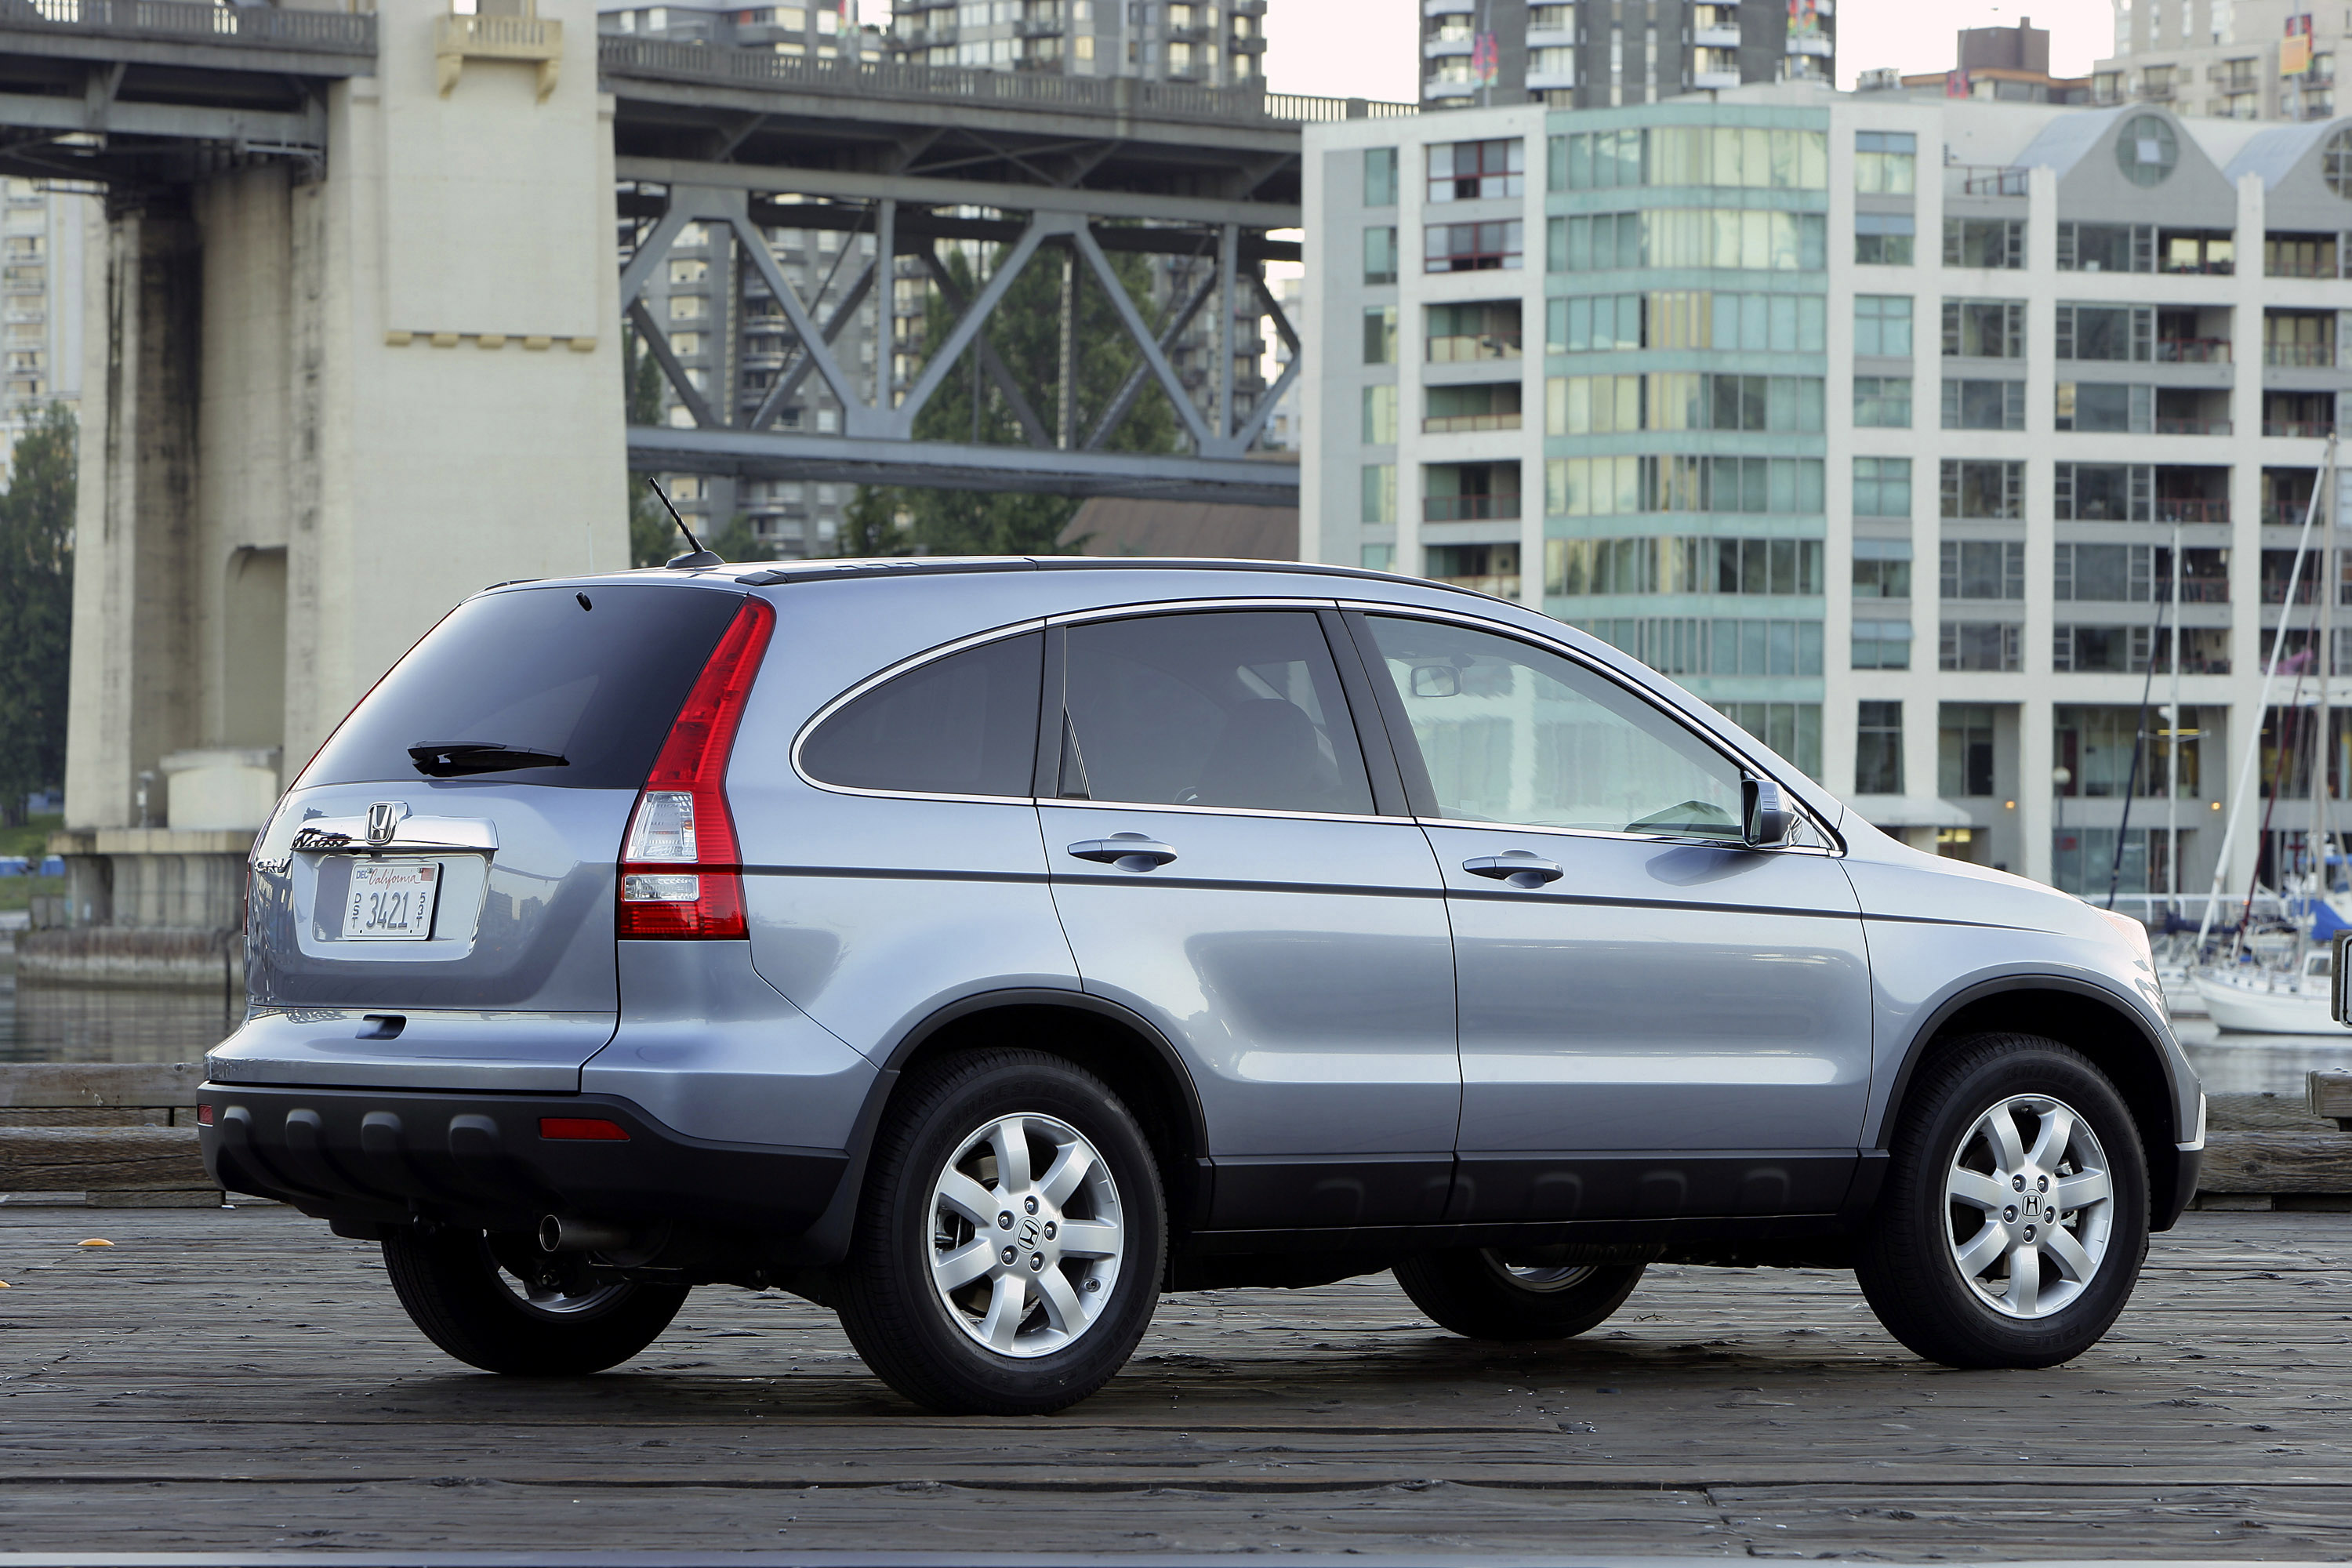 2009 Honda CR-V Delivers Refined and Stylish Approach to Entry-SUV Segment